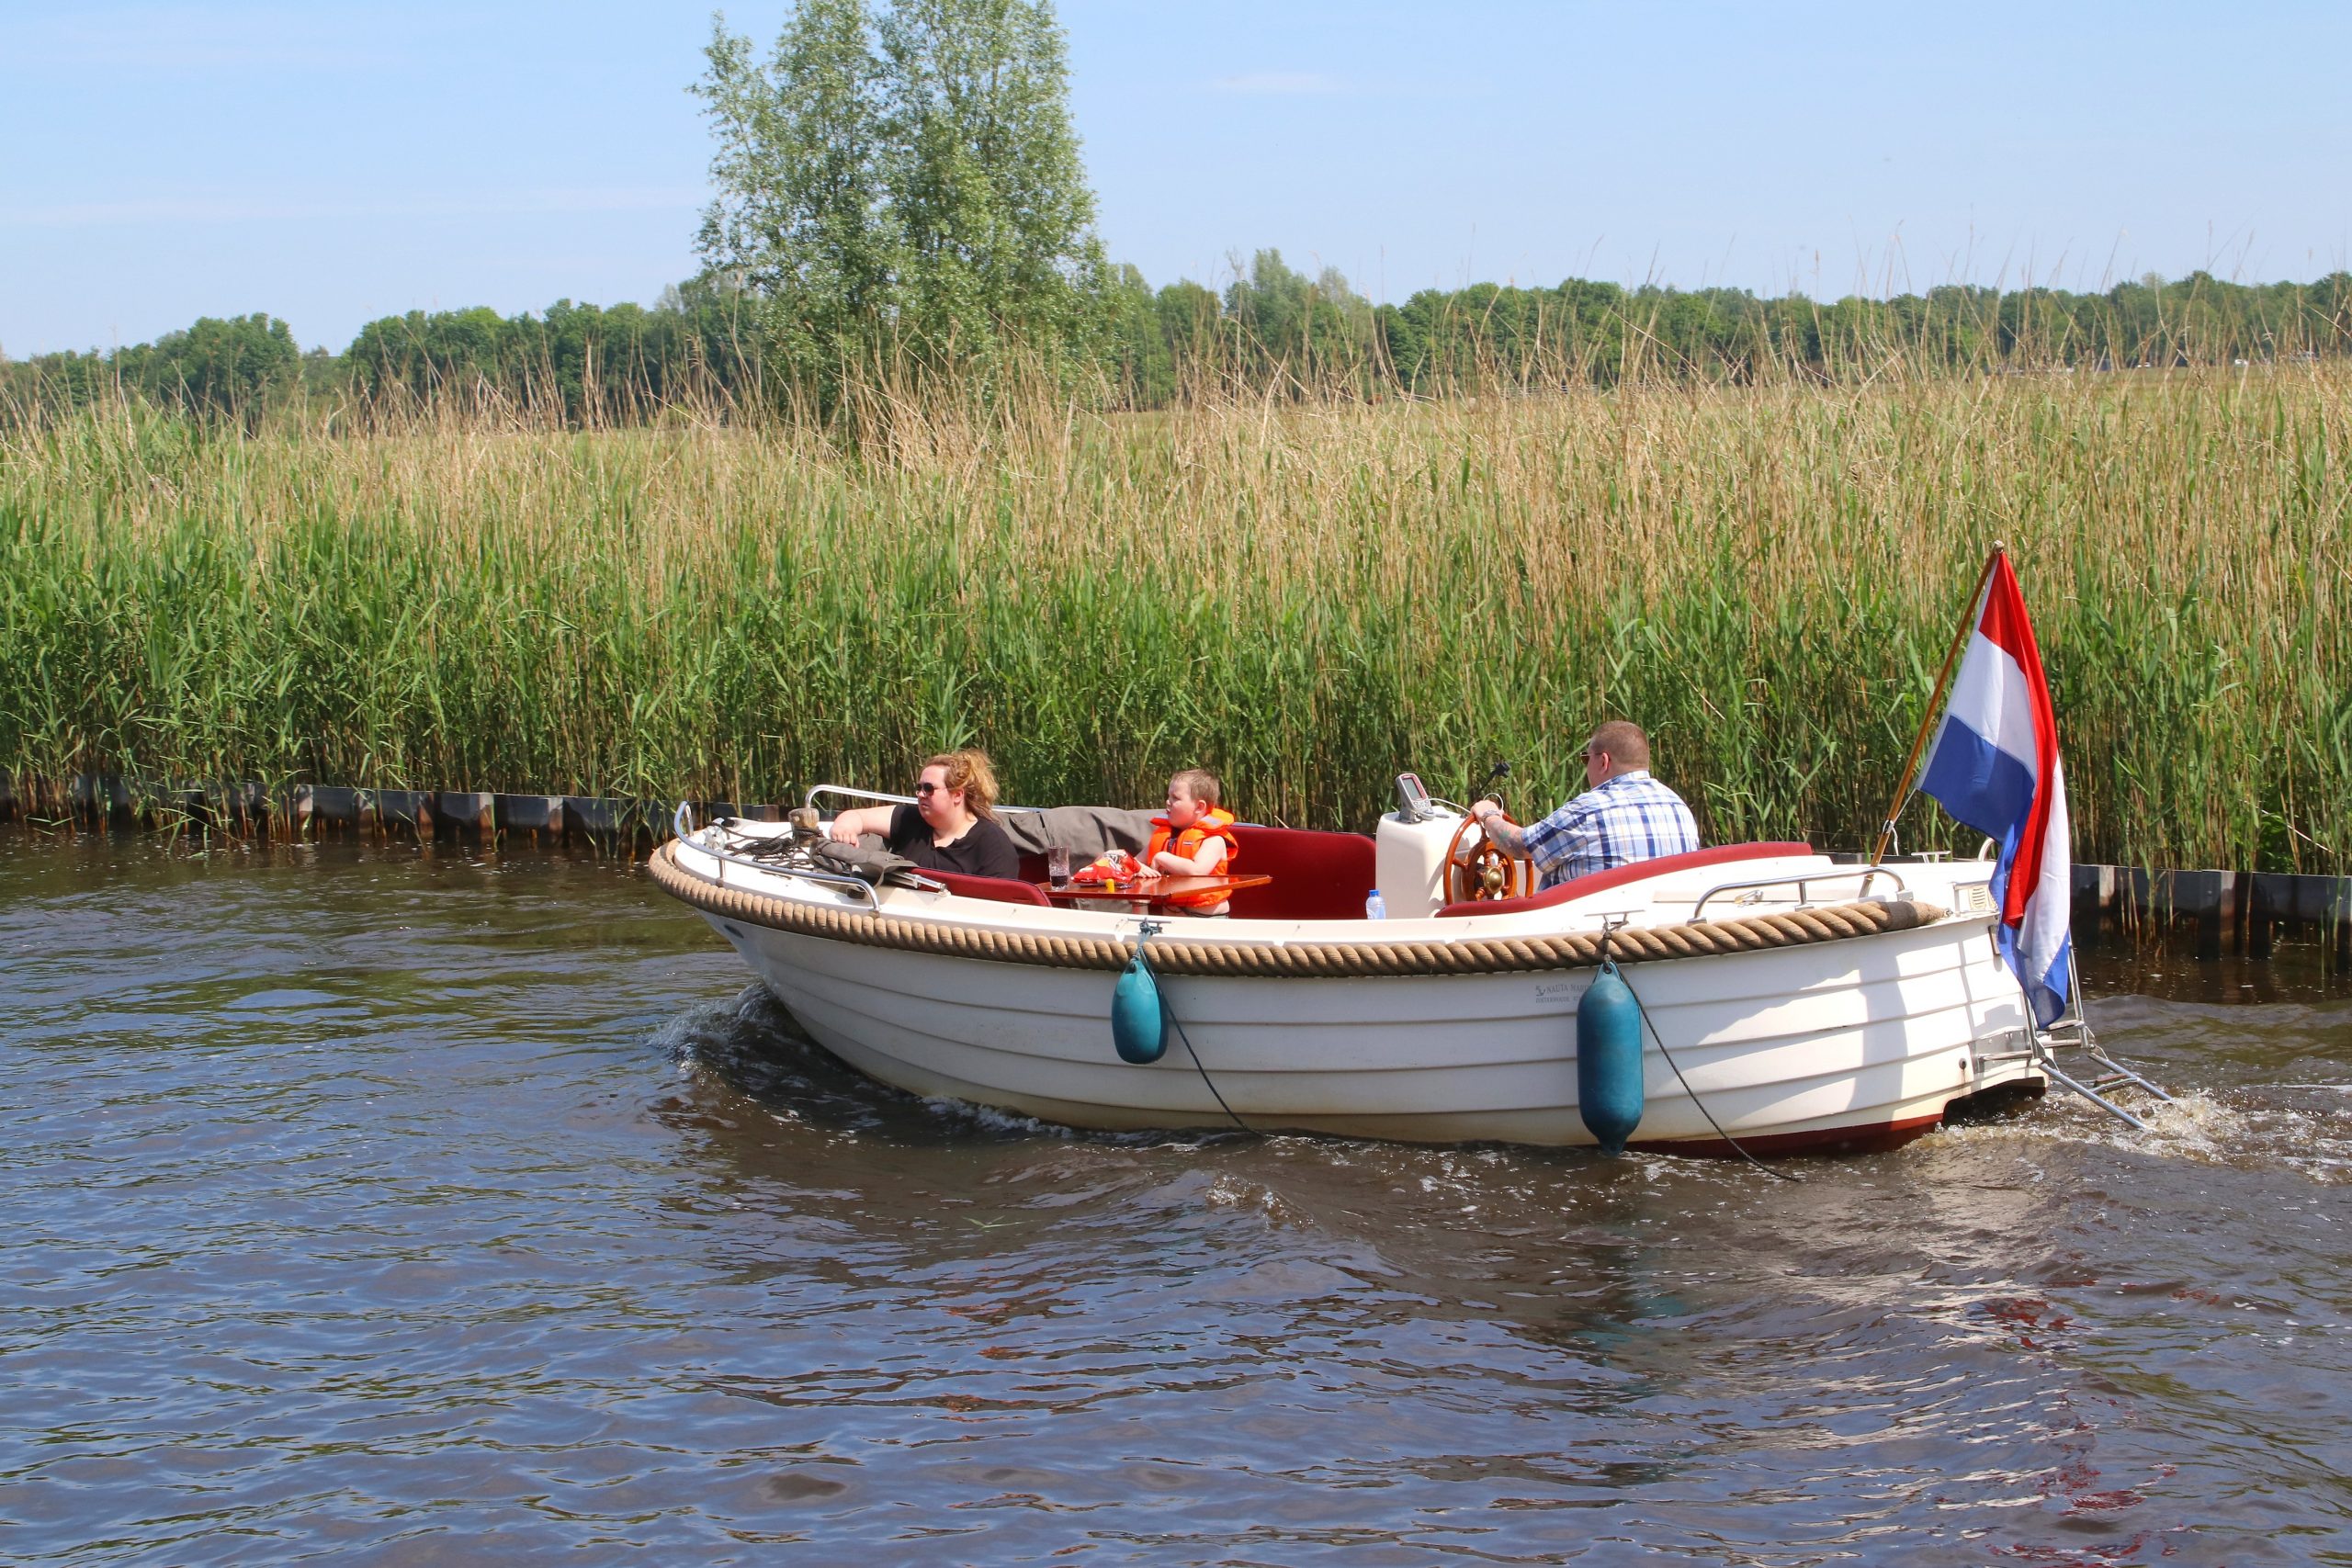 The Dutch opt for boating holidays this summer